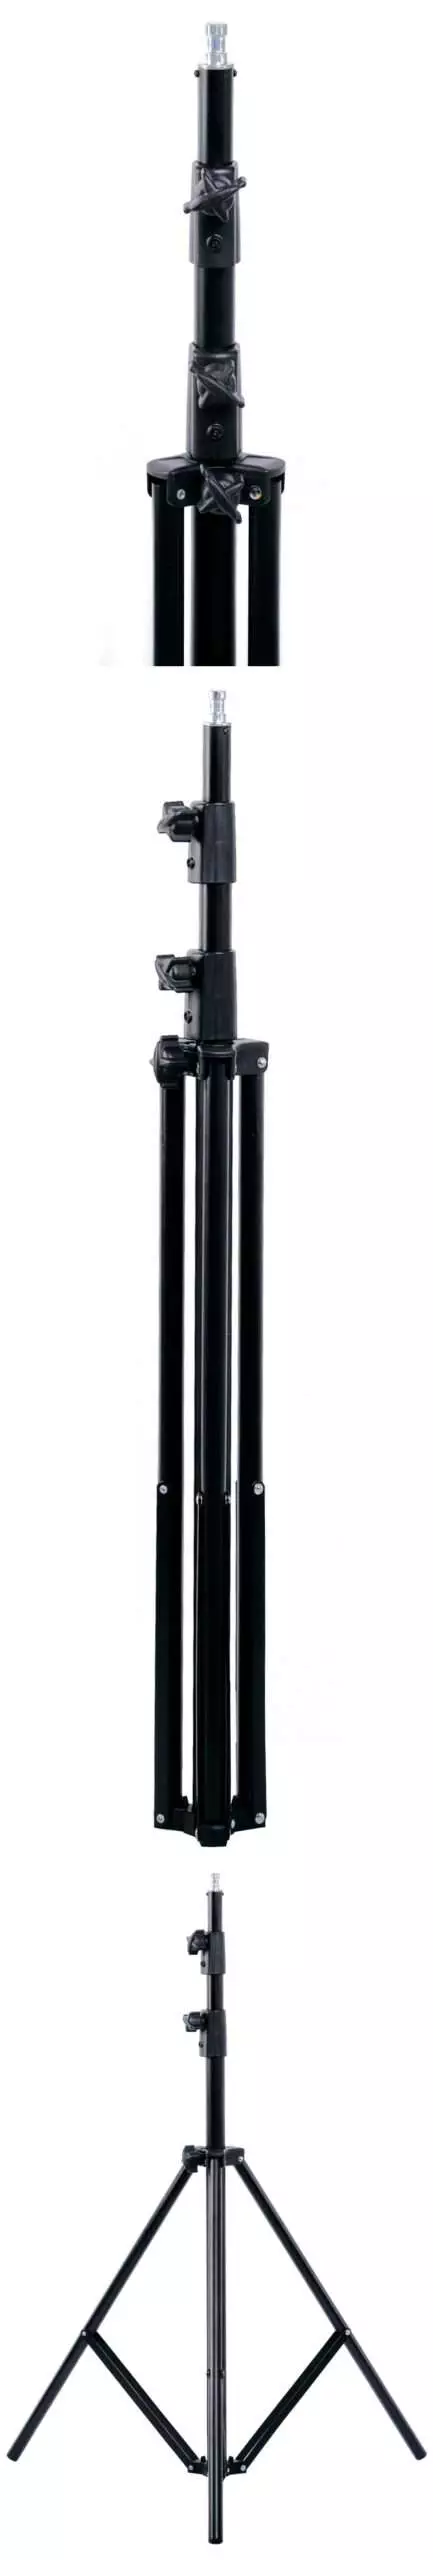 The 260T Light Stand from GODOX rises to a height of 2.6M/8.5